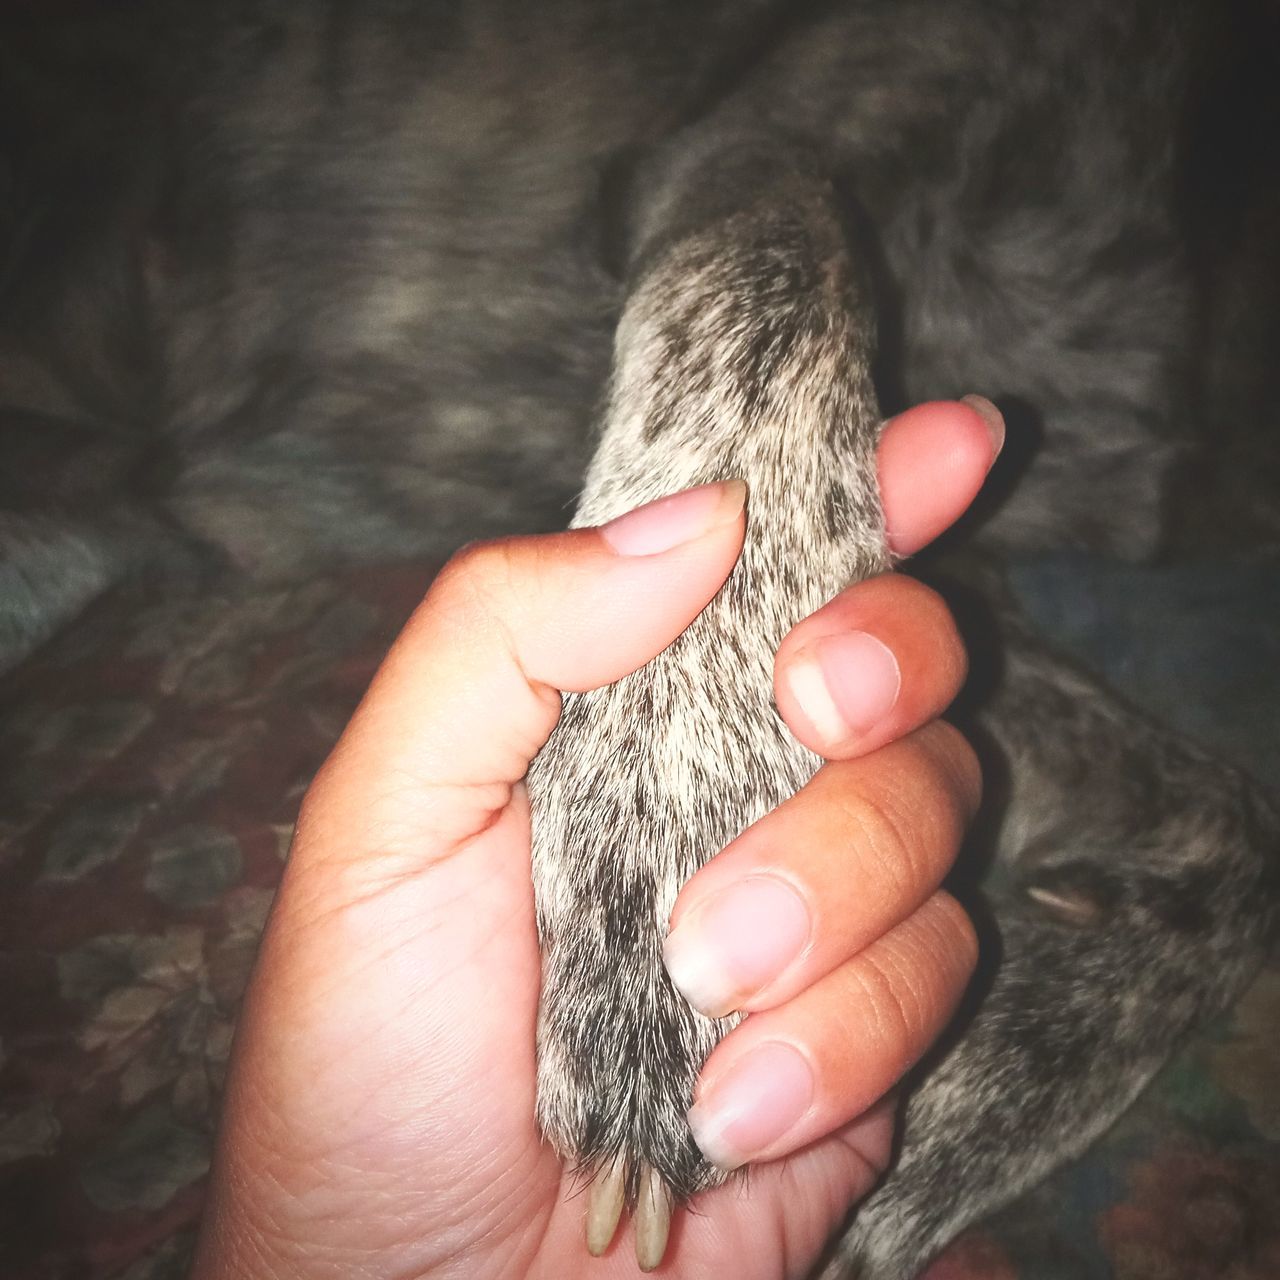 hand, animal, animal themes, one animal, one person, finger, holding, close-up, mammal, pet, animal body part, young animal, domestic animals, indoors, personal perspective, focus on foreground, animal hair, animal wildlife